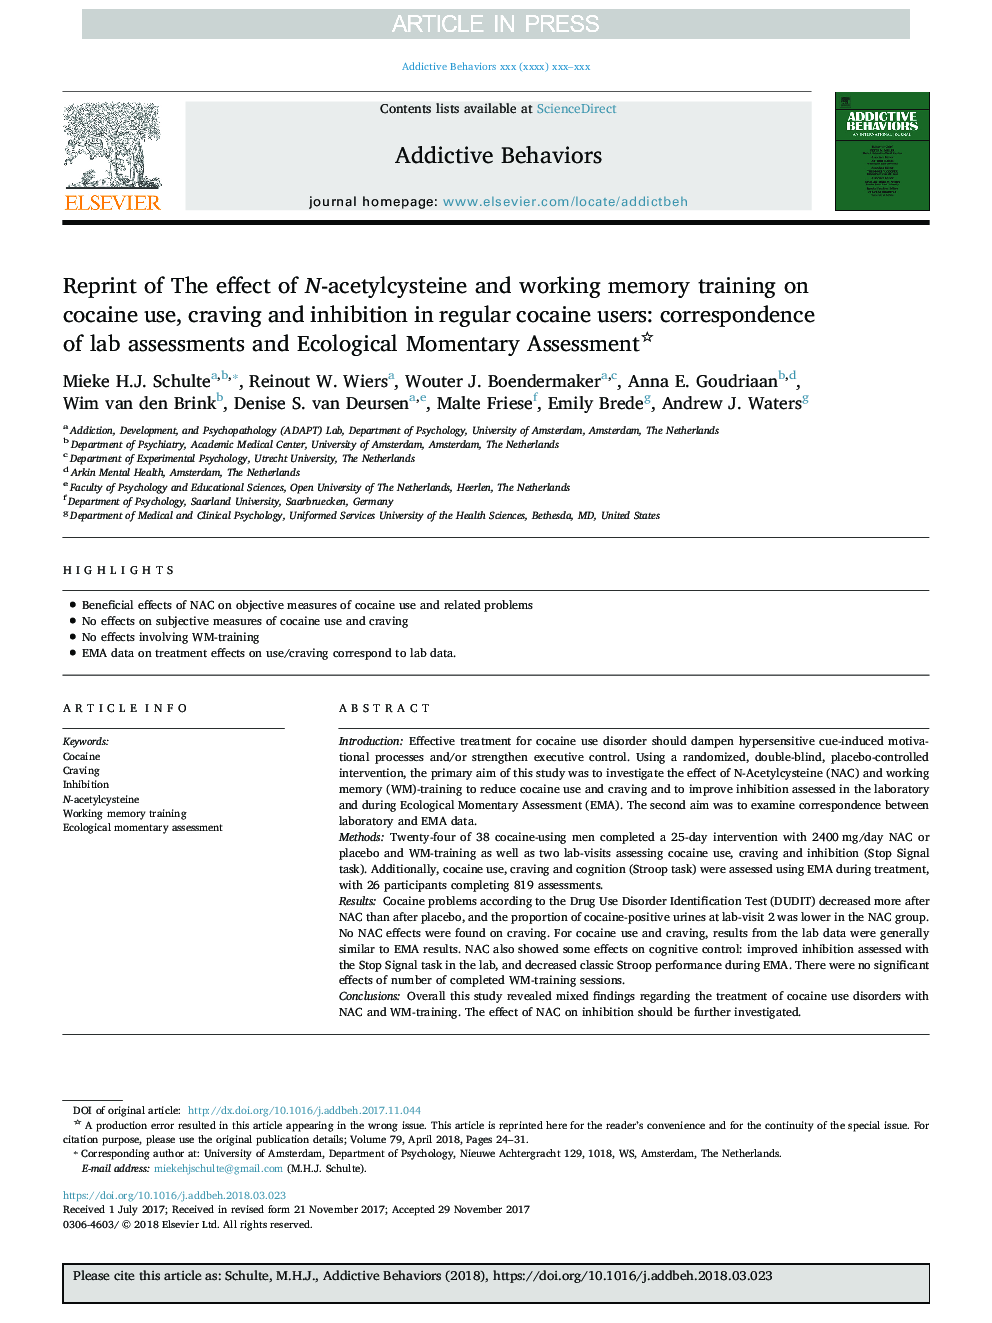 Reprint of The effect of N-acetylcysteine and working memory training on cocaine use, craving and inhibition in regular cocaine users: correspondence of lab assessments and Ecological Momentary Assessment